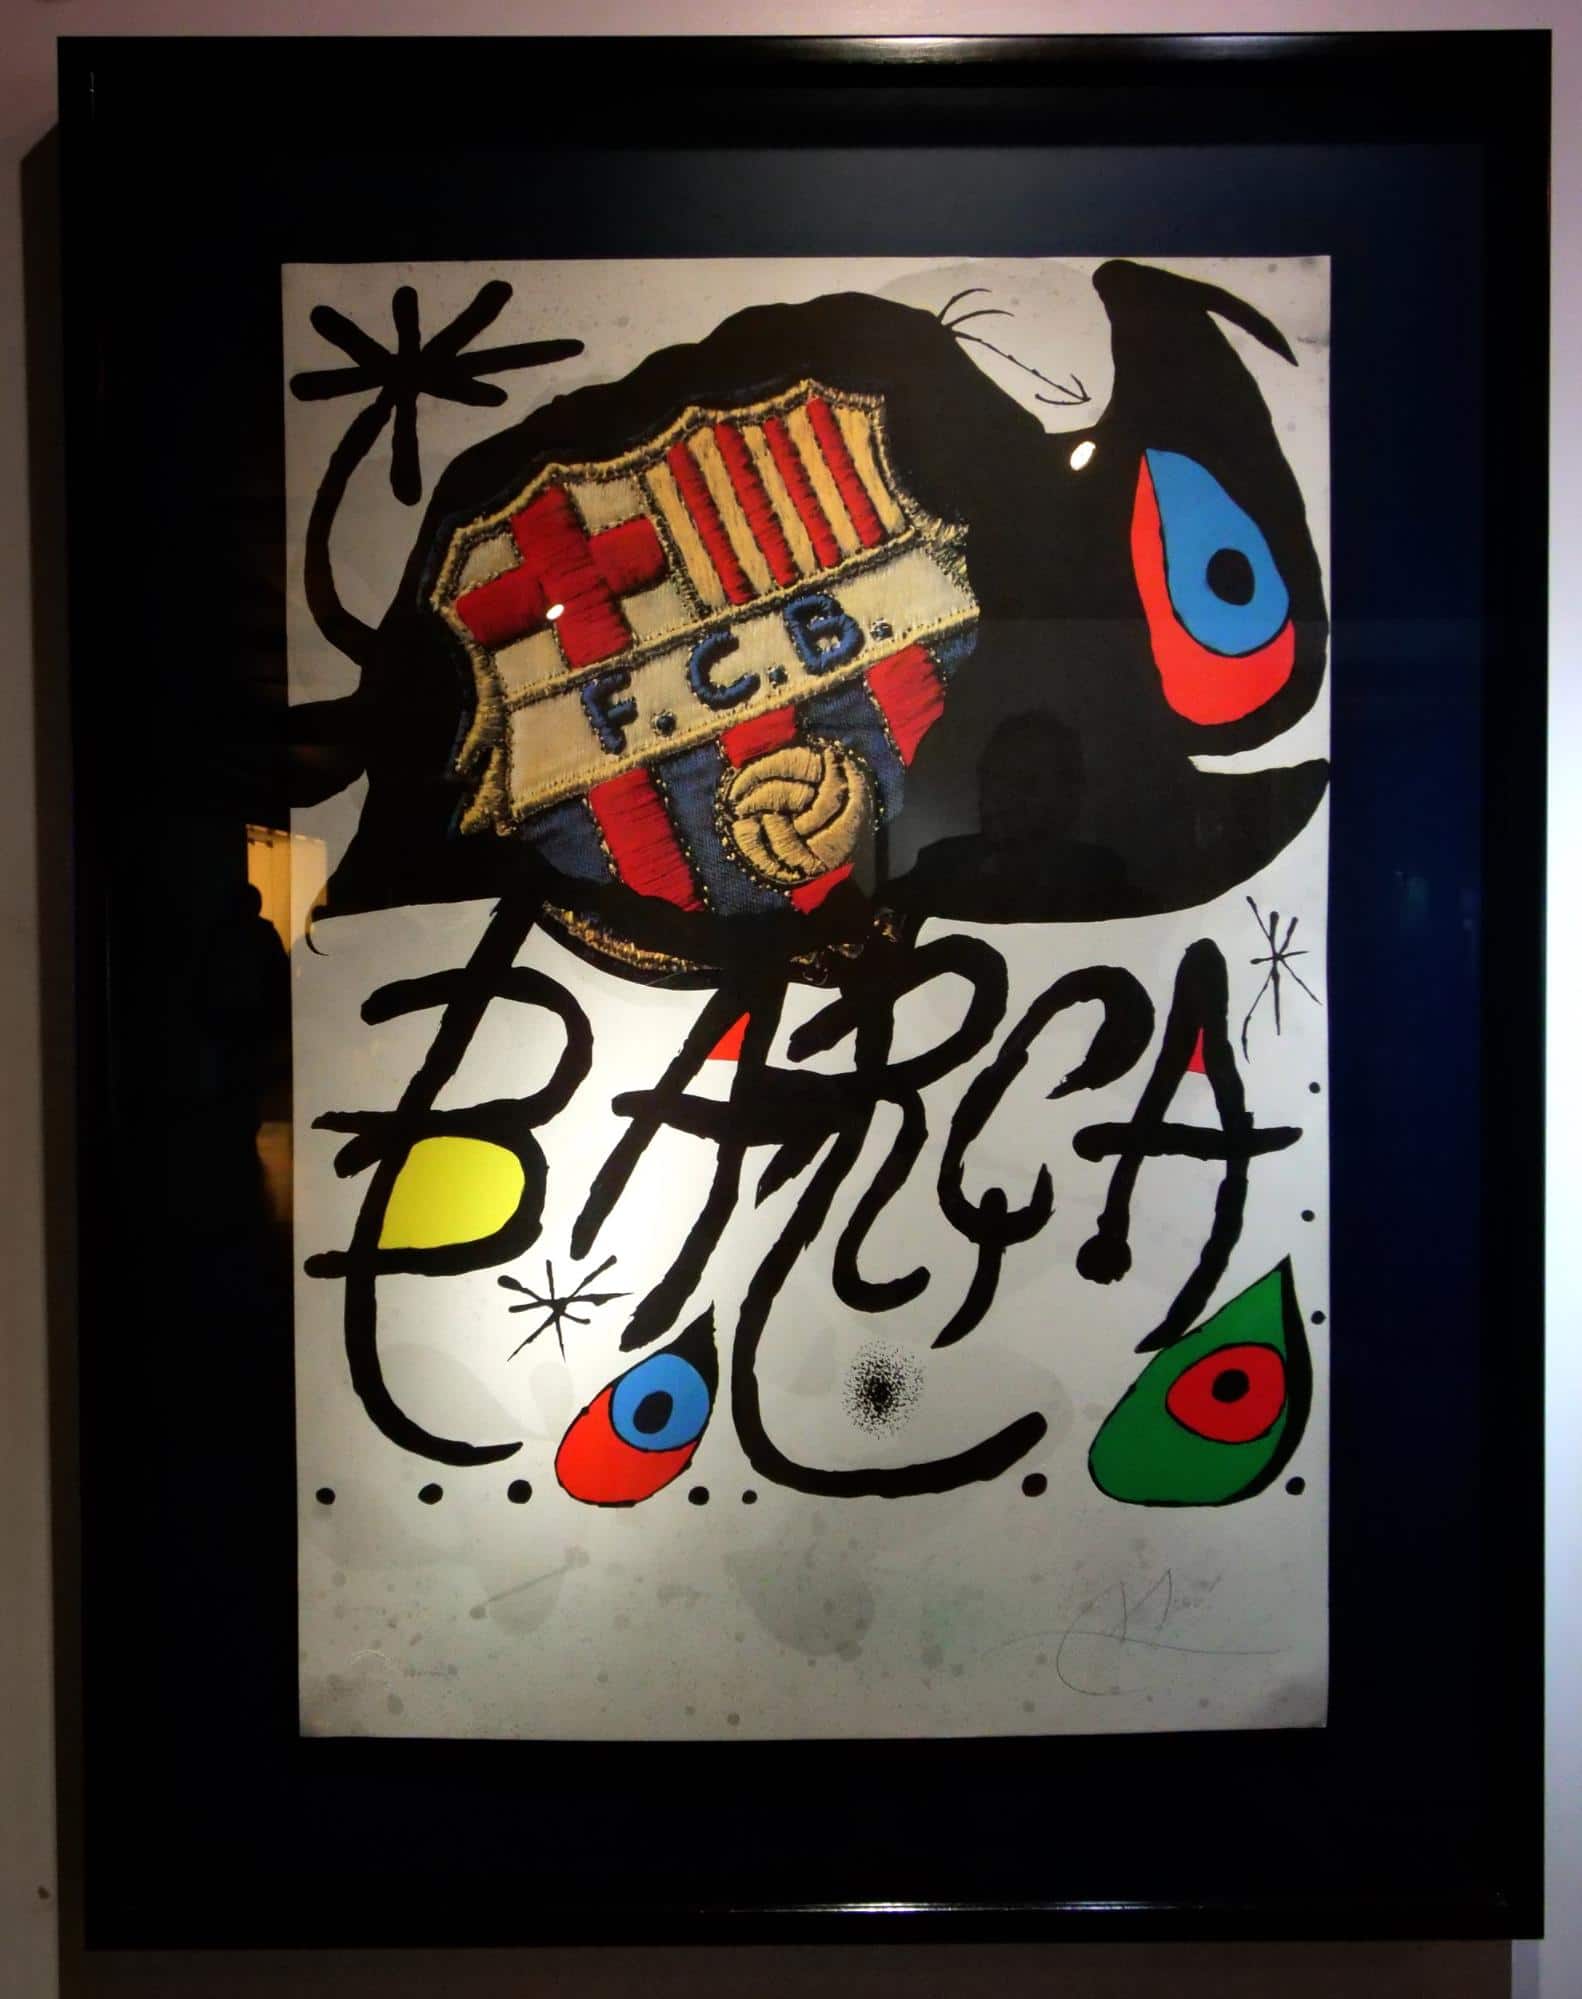 Miro’s painting for FC Barcelona